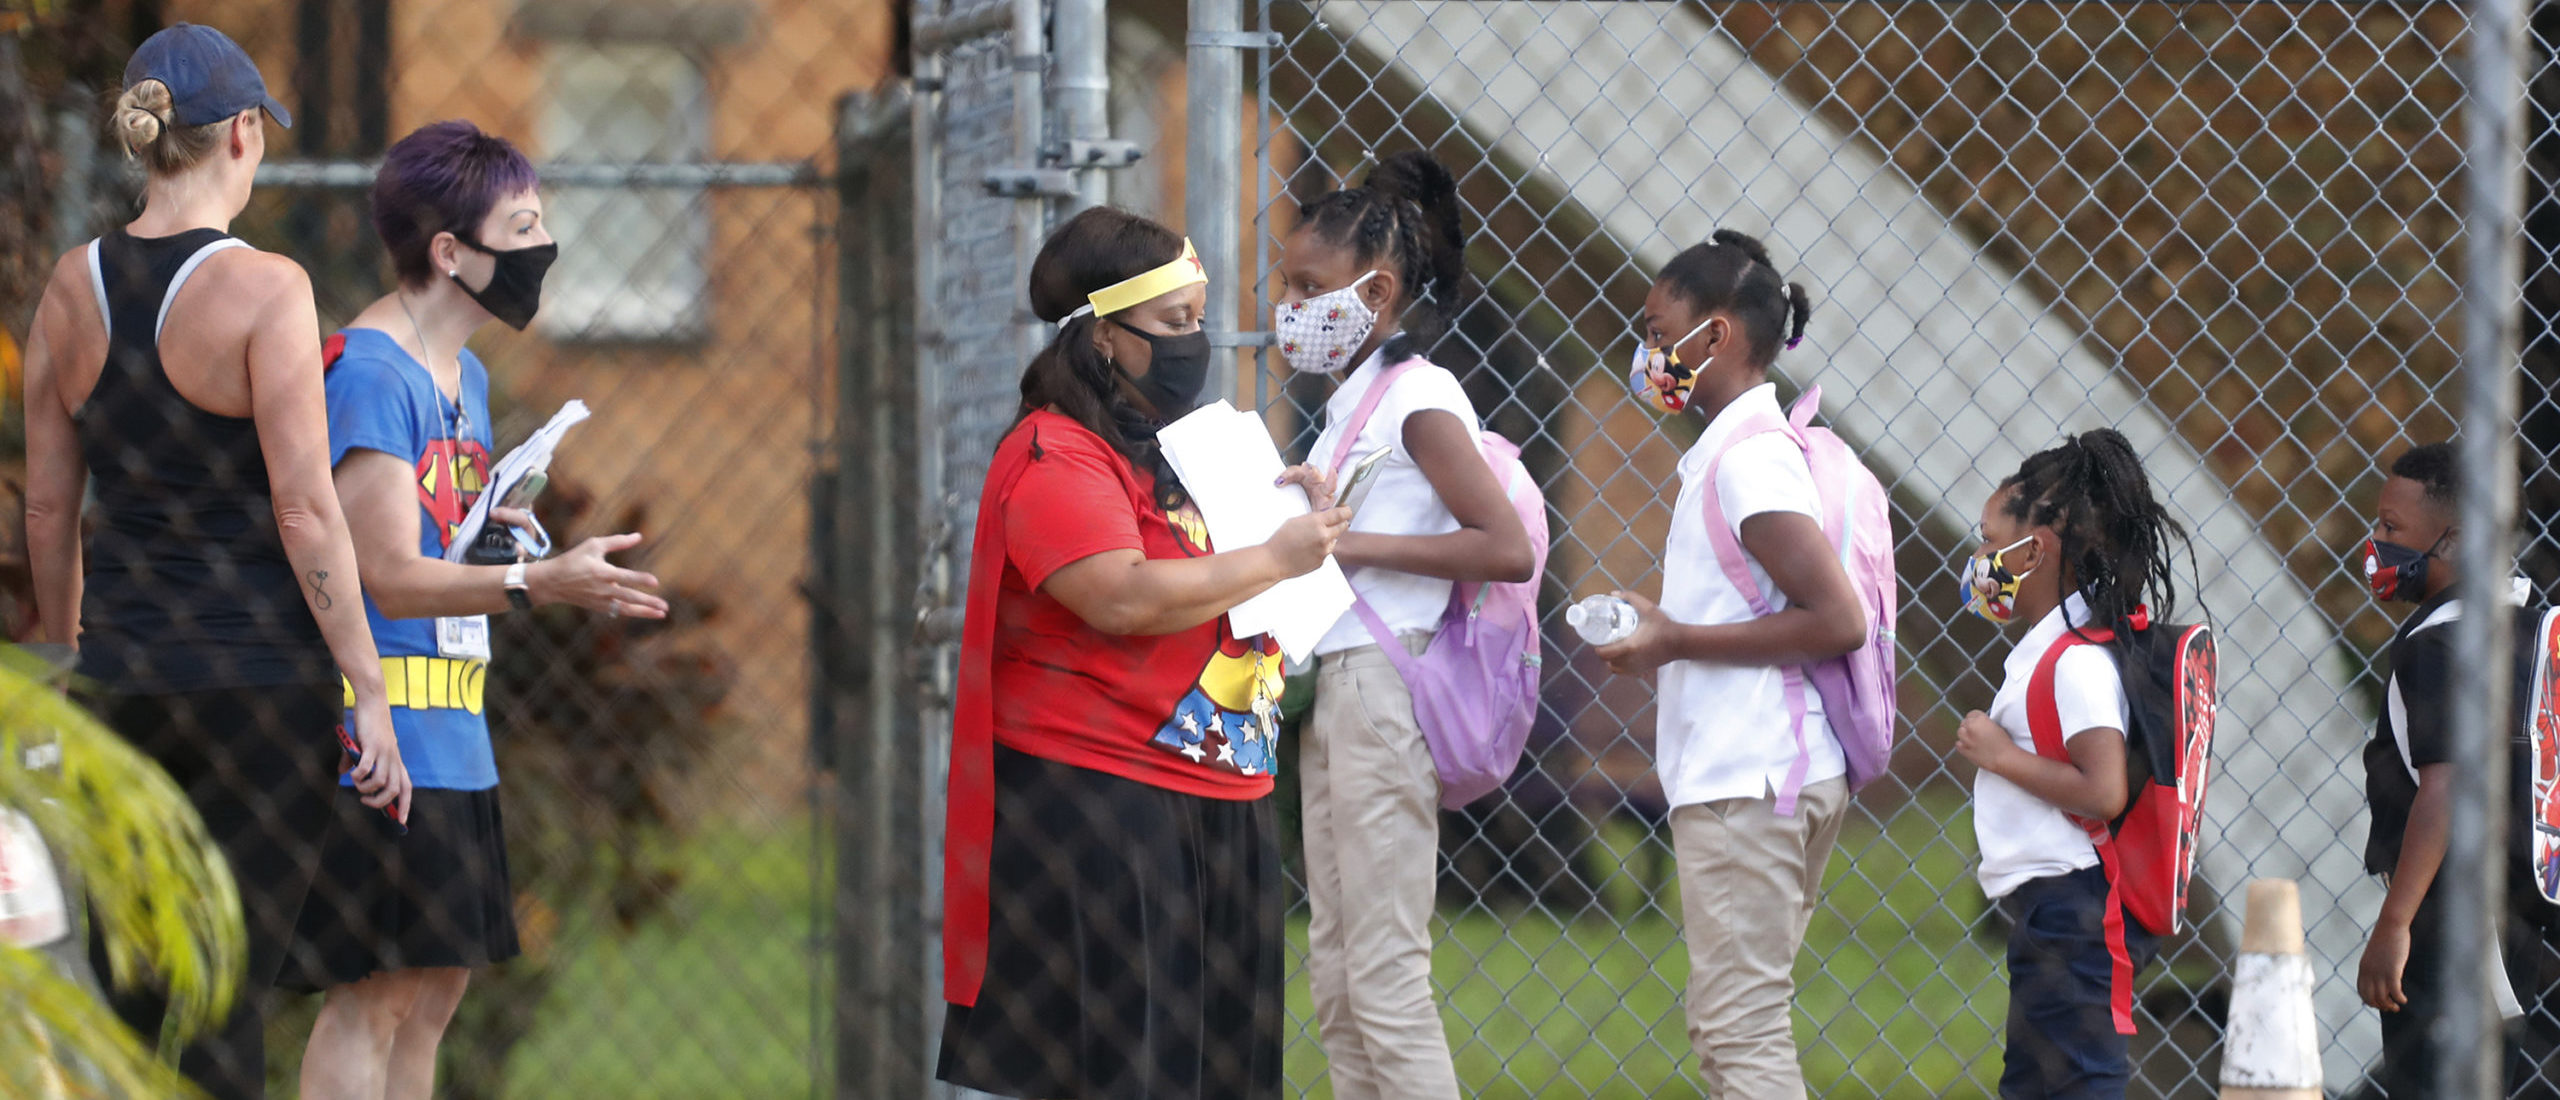 Students return to school at Seminole Heights Elementary School after the Florida Department of Education mandated that all schools must have in-class learning during the week on August 31, 2020 in Tampa, Florida. The Hillsborough County Schools District gives their students the in-class learning option amid the coronavirus pandemic. (Photo by Octavio Jones/Getty Images)